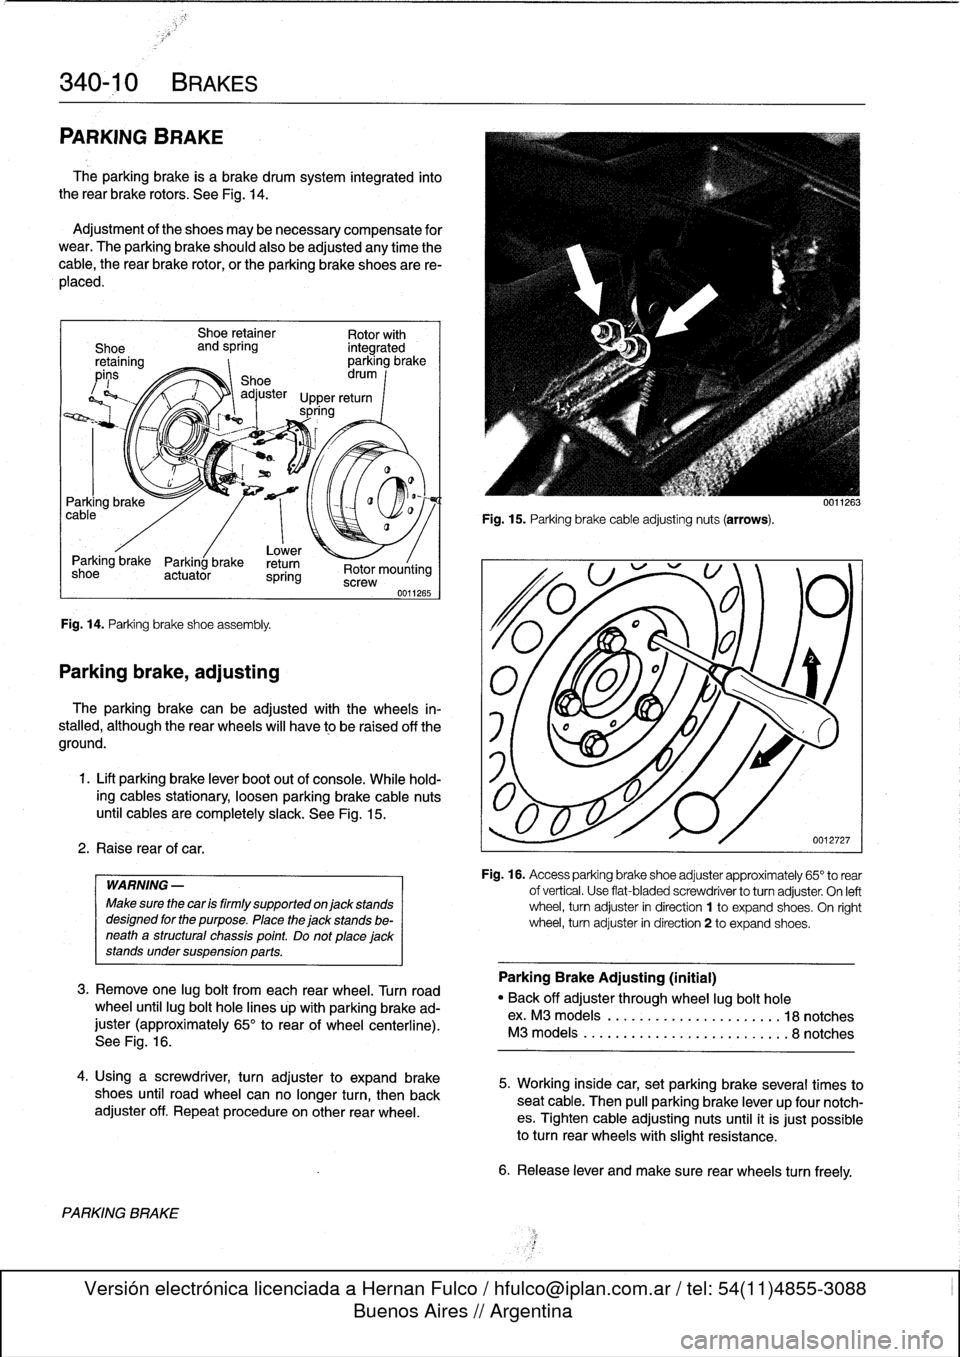 BMW 318i 1997 E36 Workshop Manual 
340-
1
0
BRAKES

PARKING
BRAKE

The
parking
brake
is
a
brake
drum
system
integrated
into
the
rear
brake
rotors
.
See
Fig
.
14
.

Adjustment
of
the
shoes
may
benecessary
compensate
for
wear
.
The
park